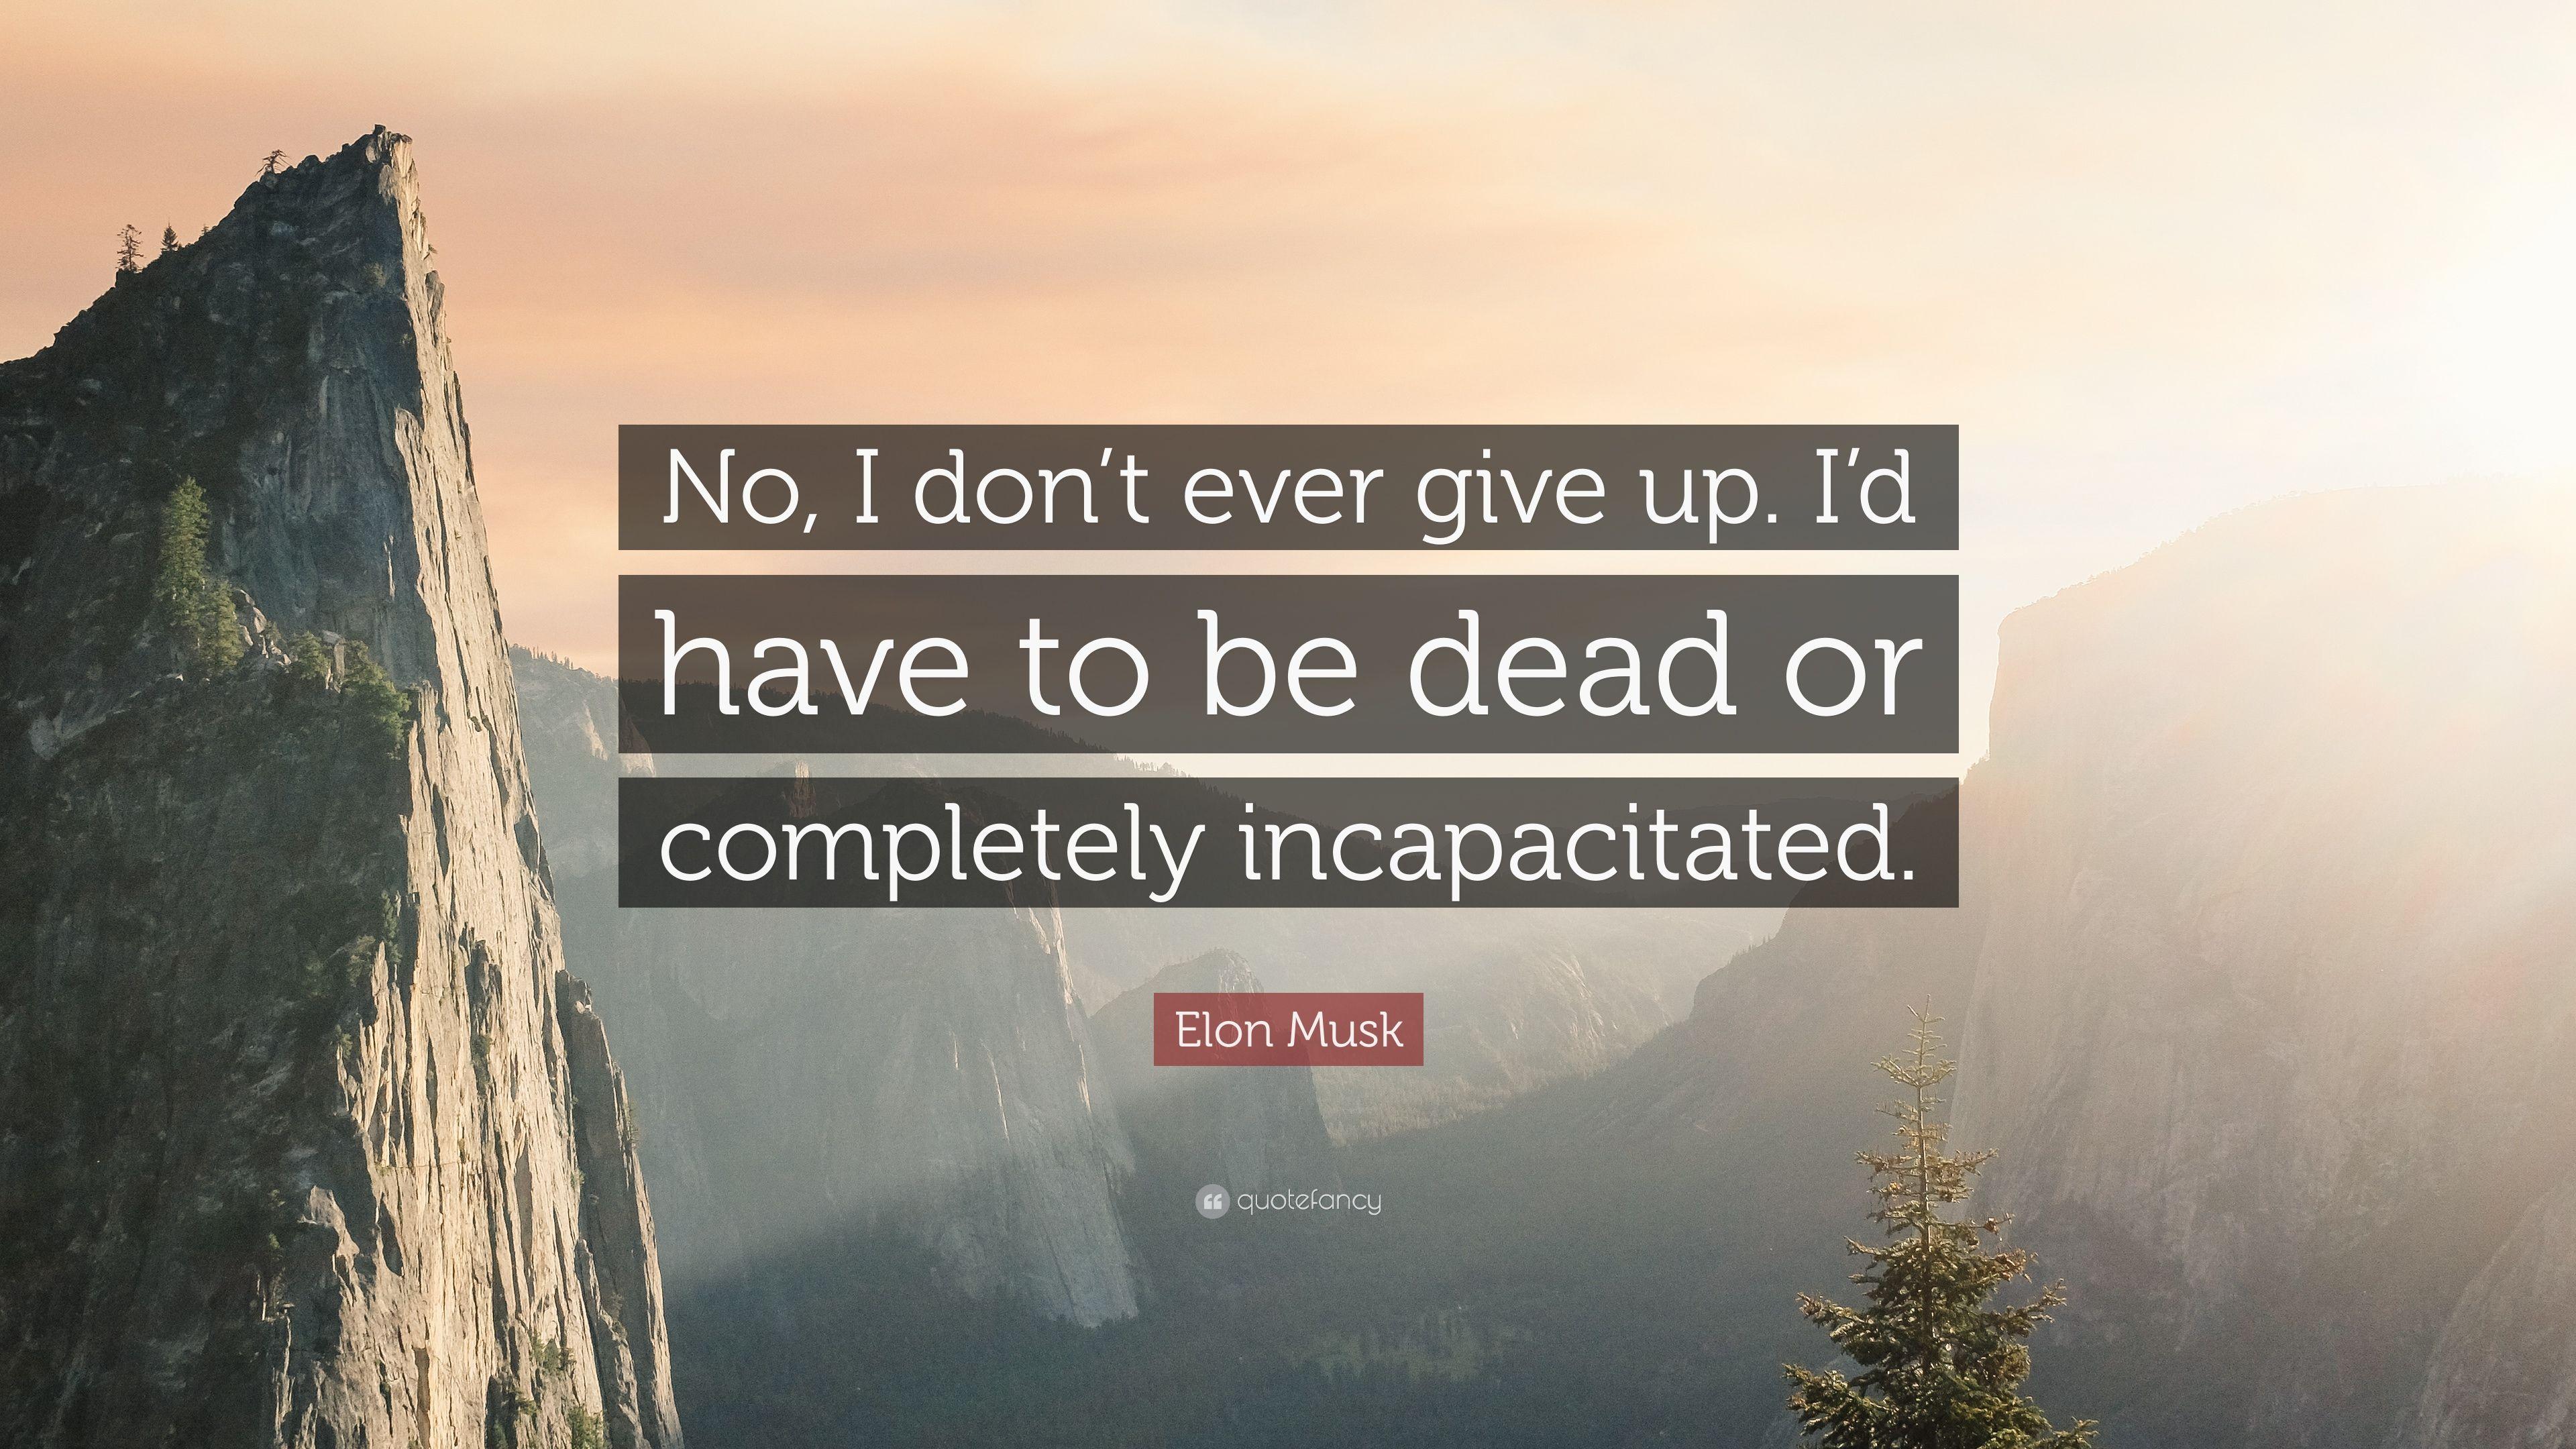 Elon Musk Quote: “No, I don't ever give up. I'd have to be dead or